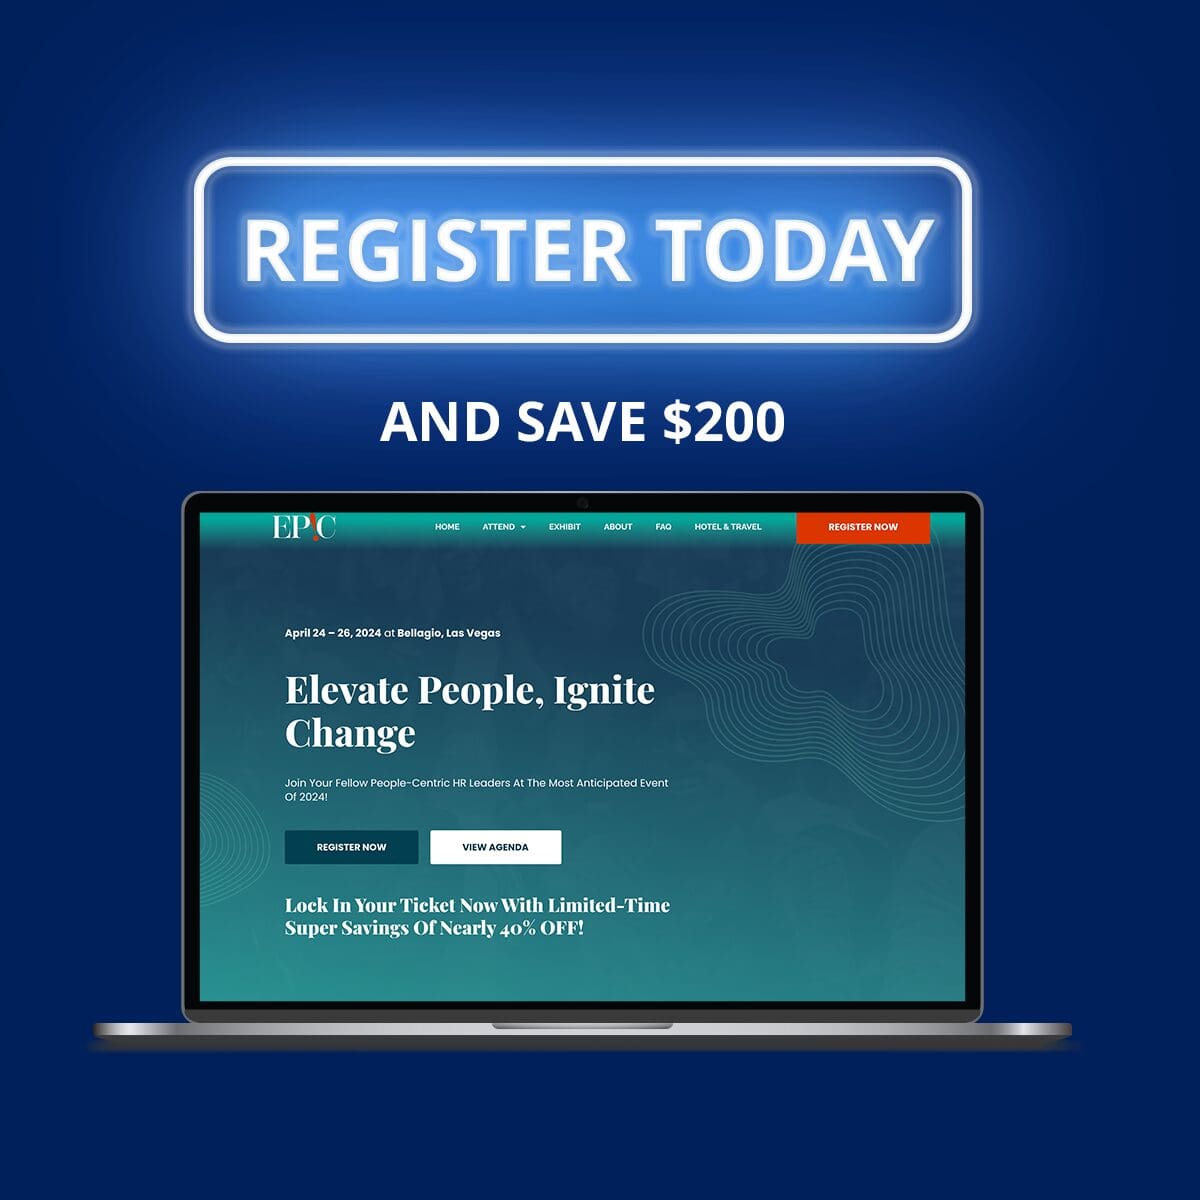 Register for Epic Today to save $200